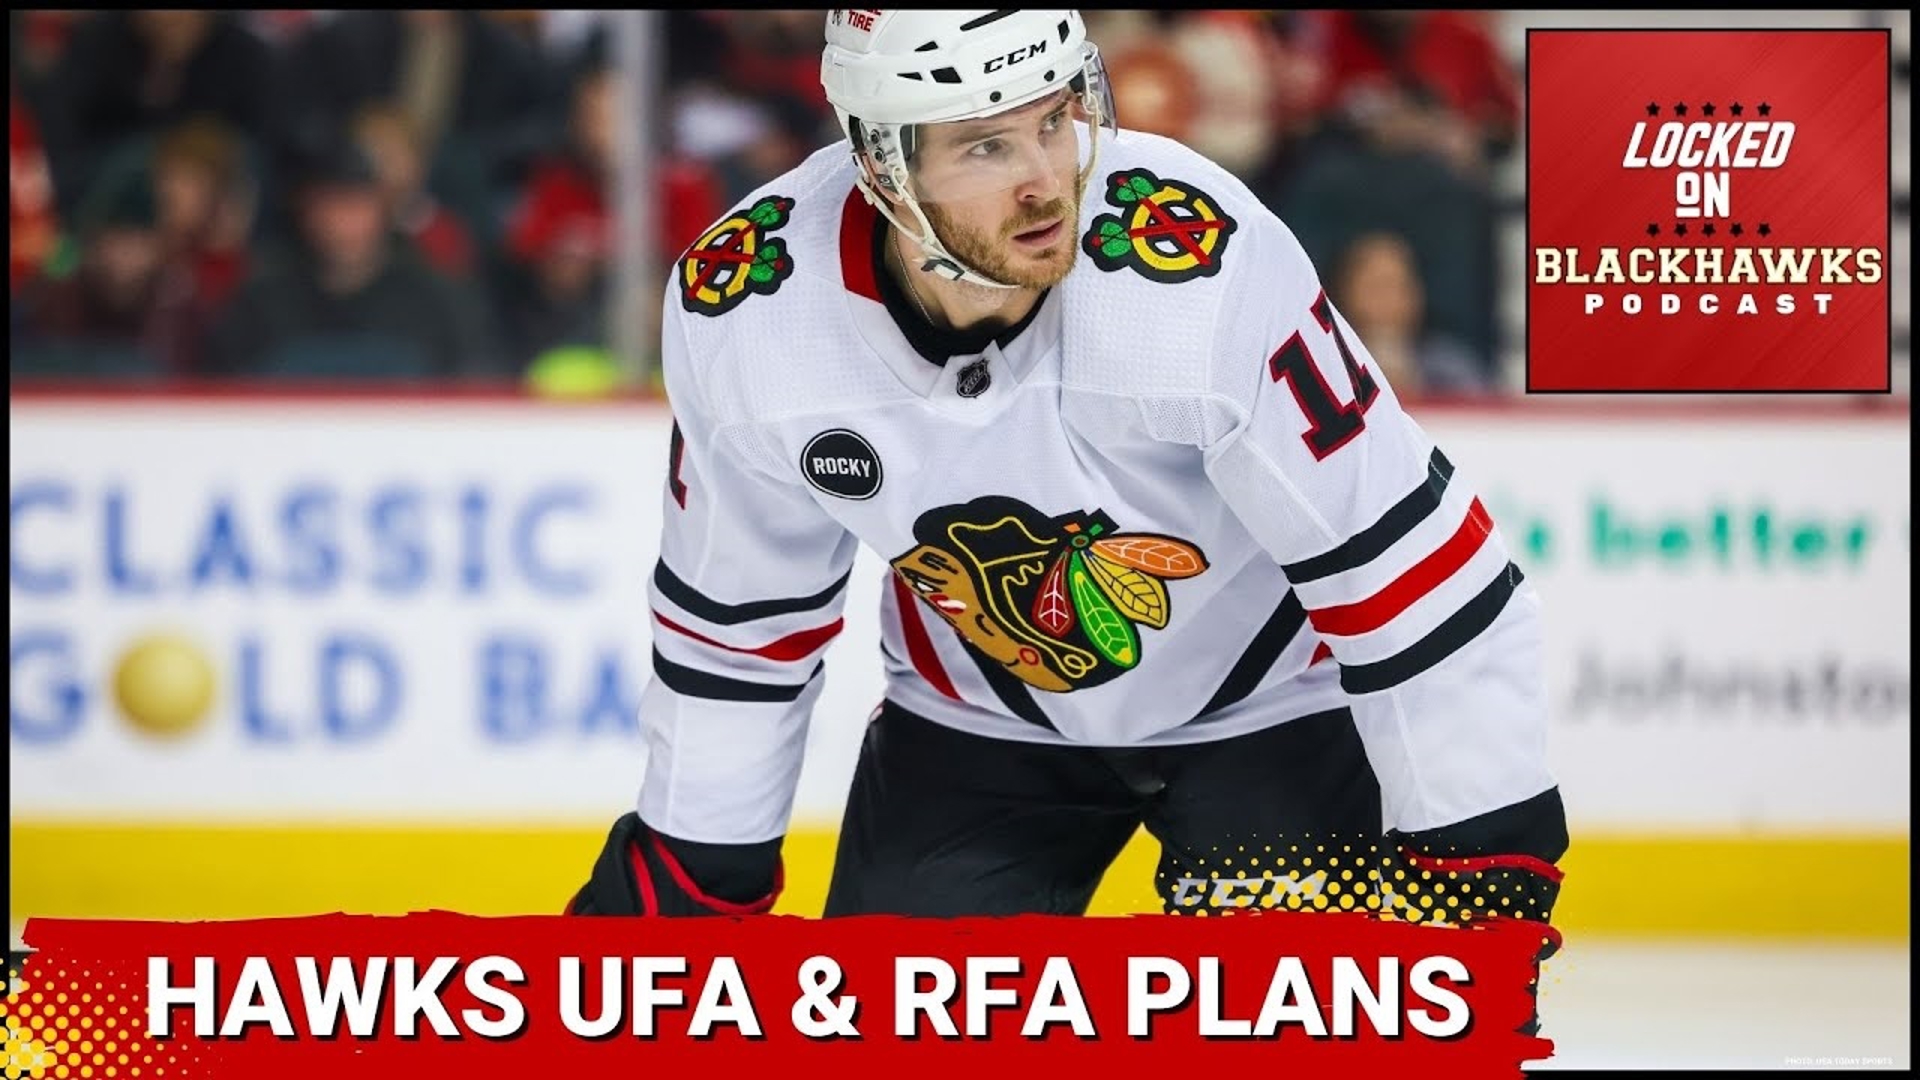 Wednesday's episode begins with a discussion on ALL the Chicago Blackhawks' pending restricted and unrestricted free agents.